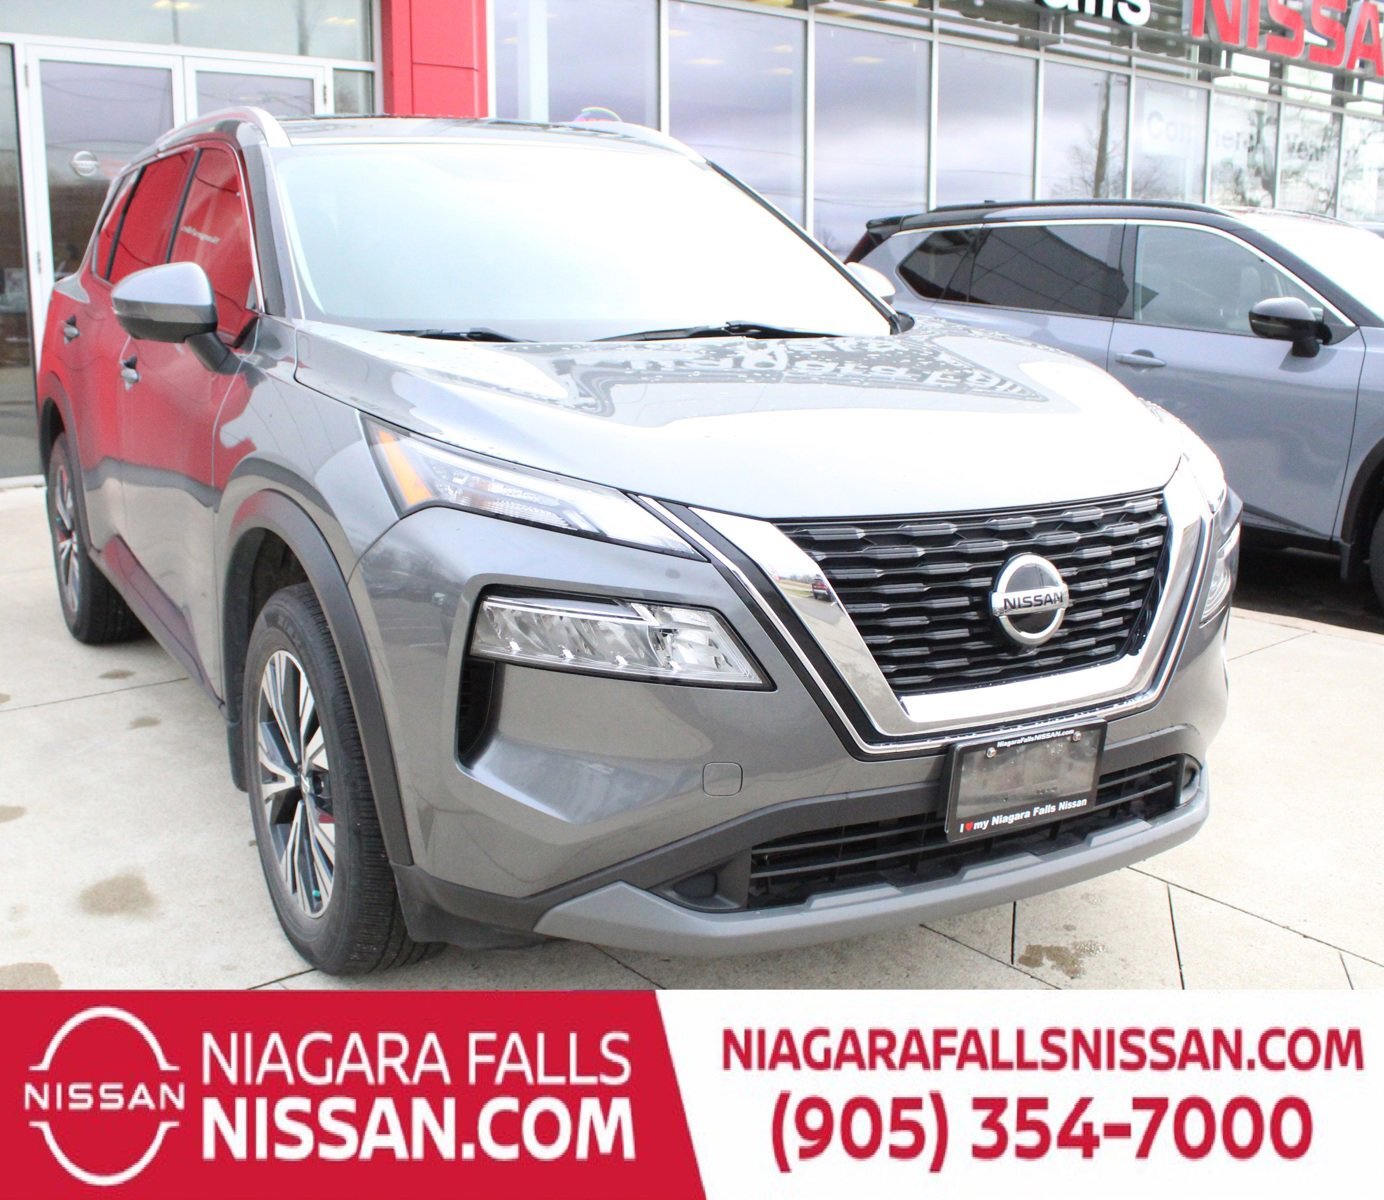 2021 Nissan Rogue SV MOONROOF/ LOW KM/ HEATED FRONT SEATS/ HEATED ST